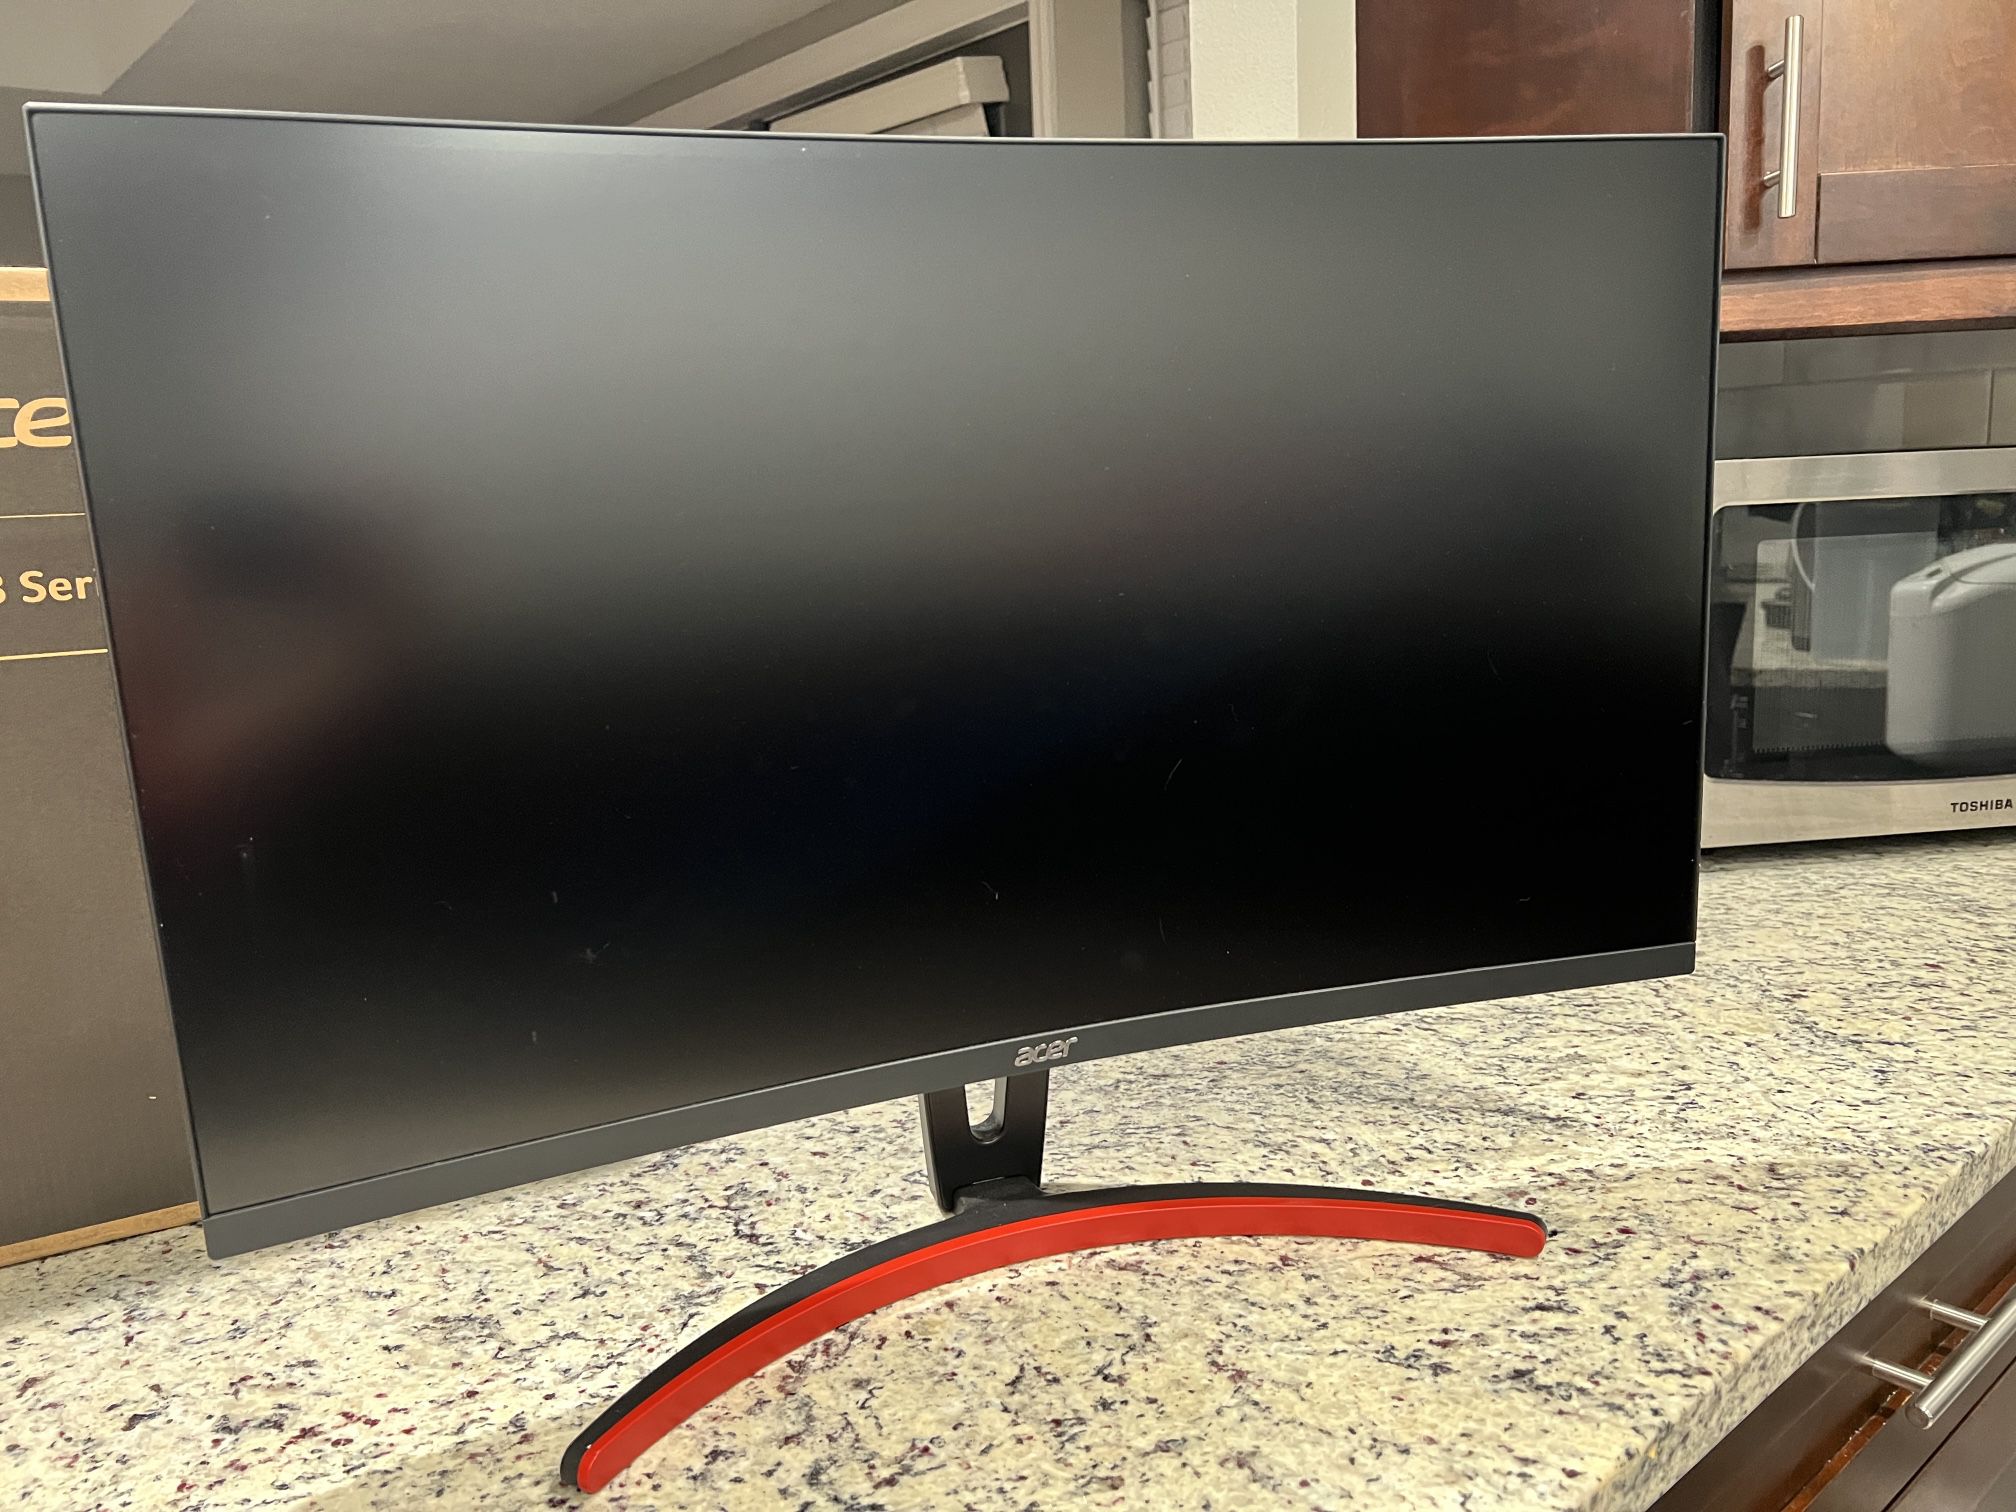 New Acer 27-inch Curved WQHD (2560 x 1440) 144Hz Gaming Monitor with box, original $350, now $270